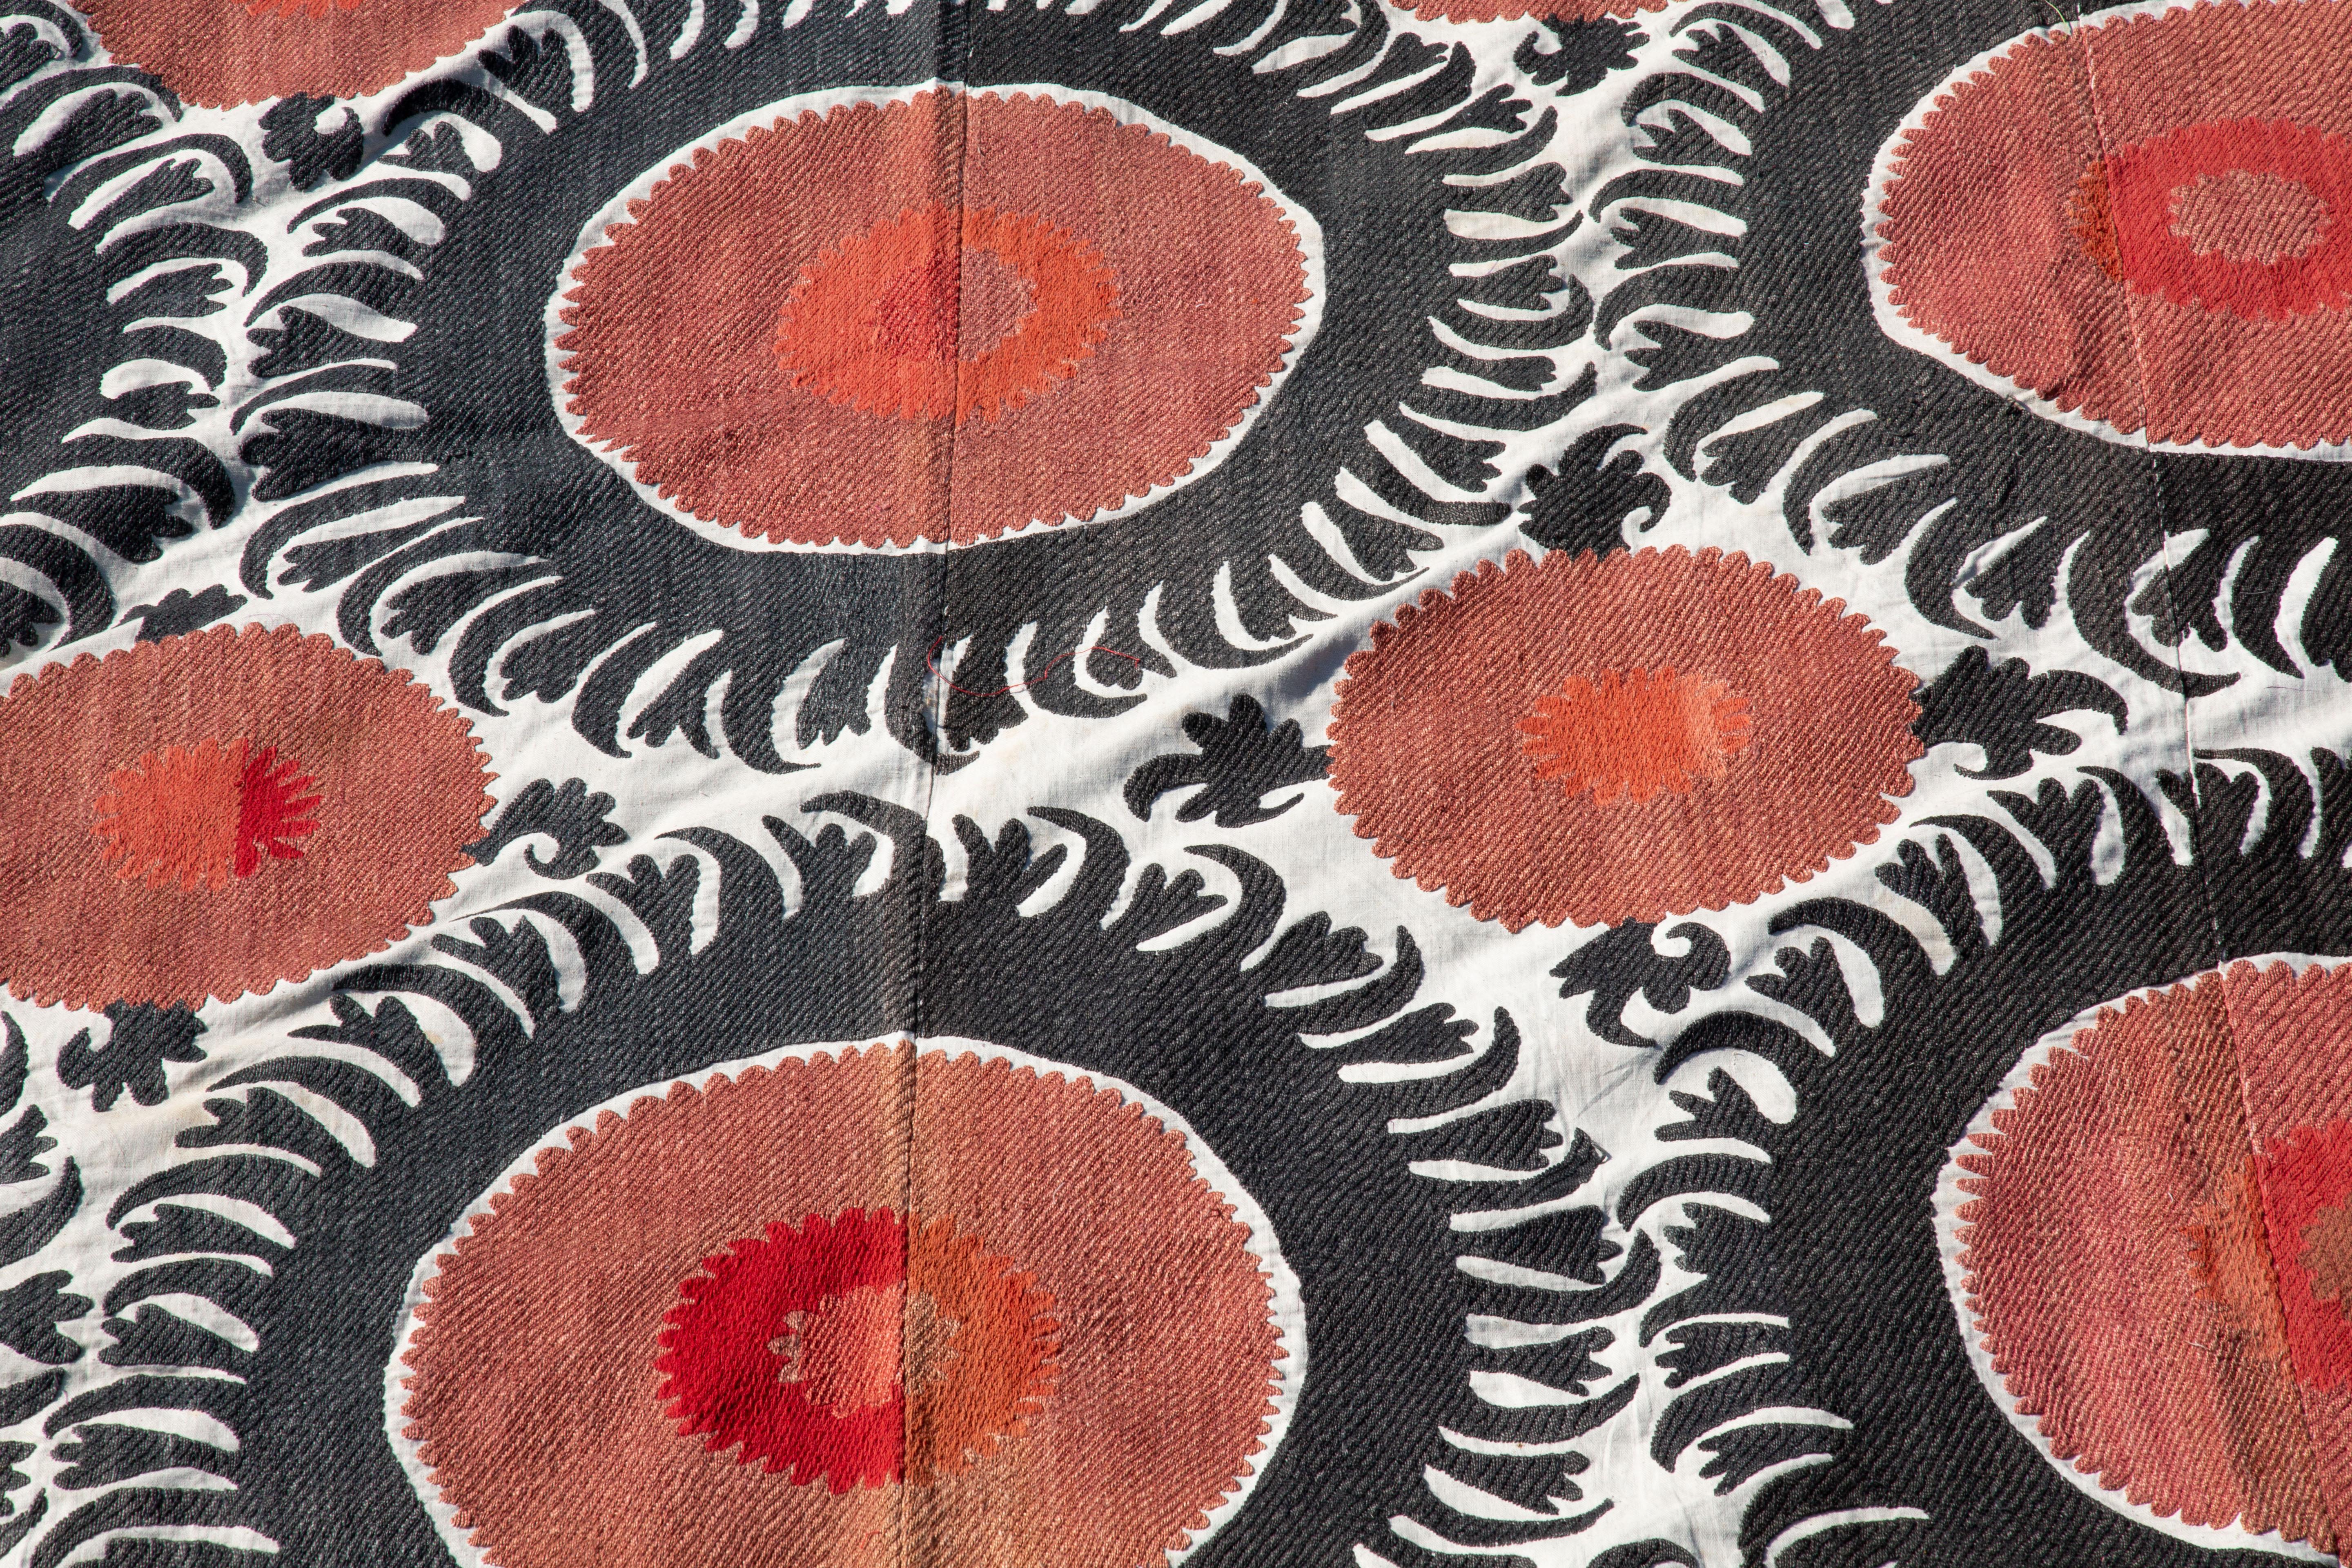 Handmade Vintage Cotton Suzani, Red, and Charcoal geometric designs.

Richly hand-embroidered vintage Uzbek suzani in iconic black and copper oranges.
Sun burst flowers are ringed with black scrolls on natural cotton.
Cotton embroidery in tight